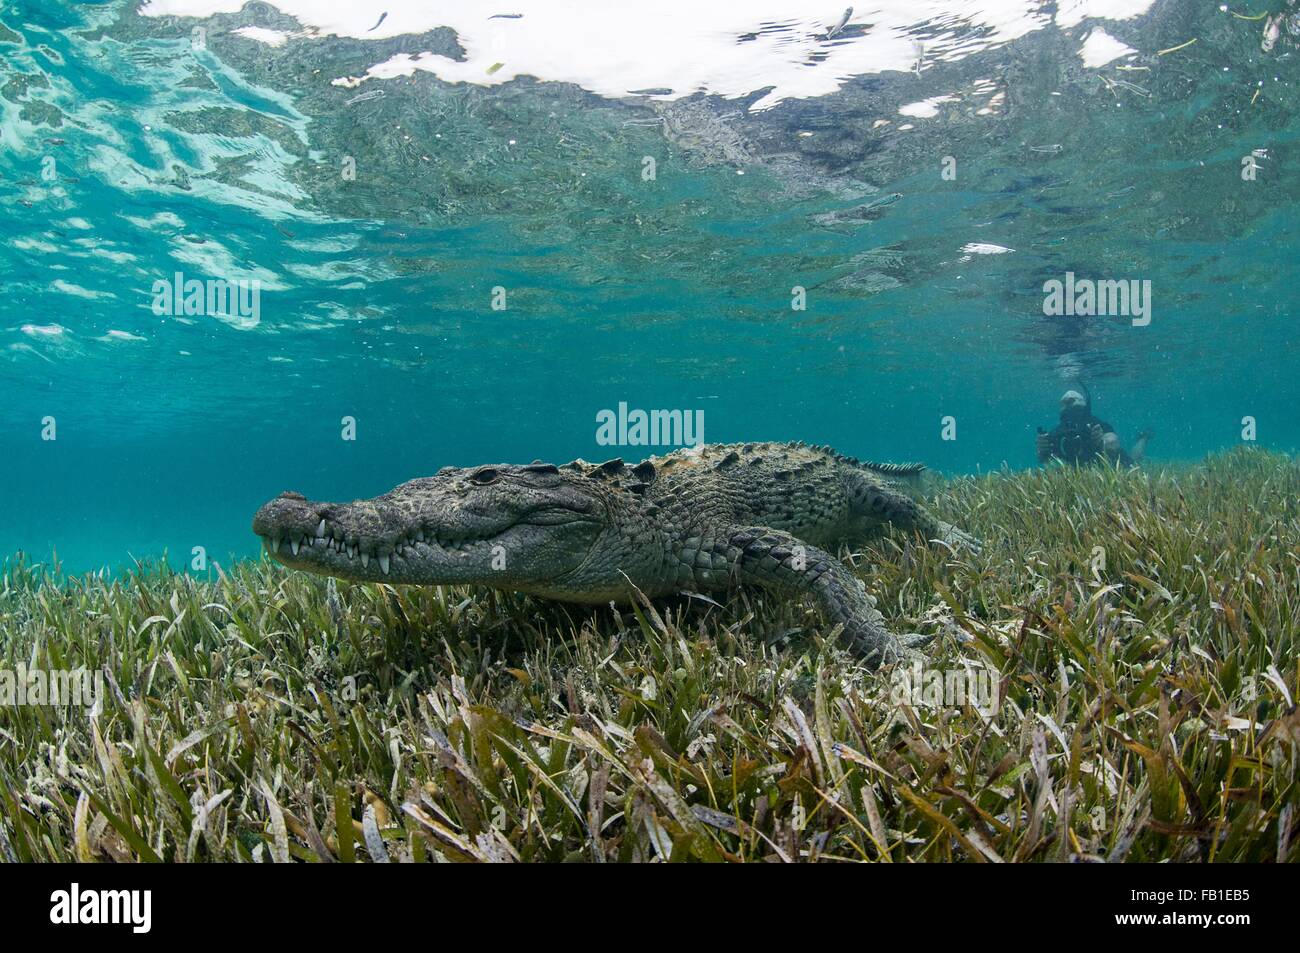 Underwater view of crocodile on seagrass in shallow water, Chinchorro Atoll, Quintana Roo, Mexico Stock Photo